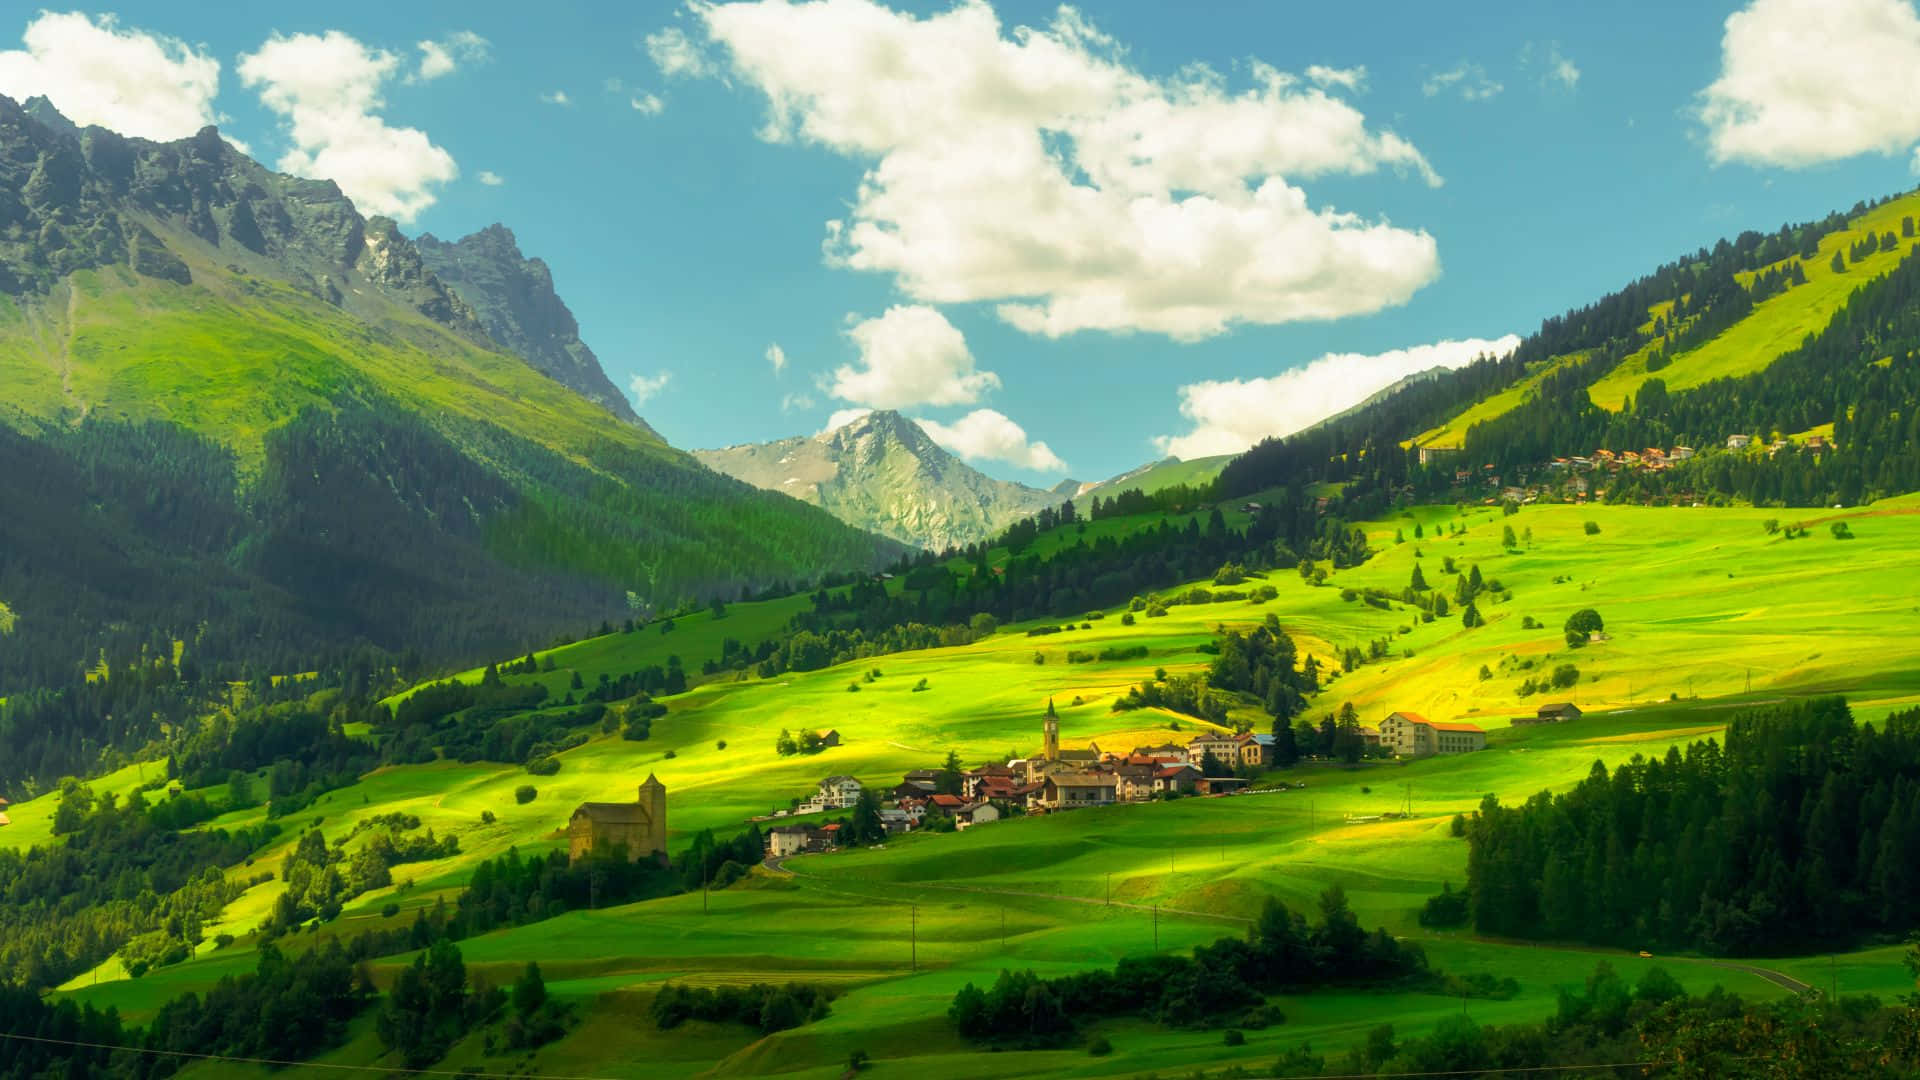 Majestic Swiss Alps overlooking a tranquil village